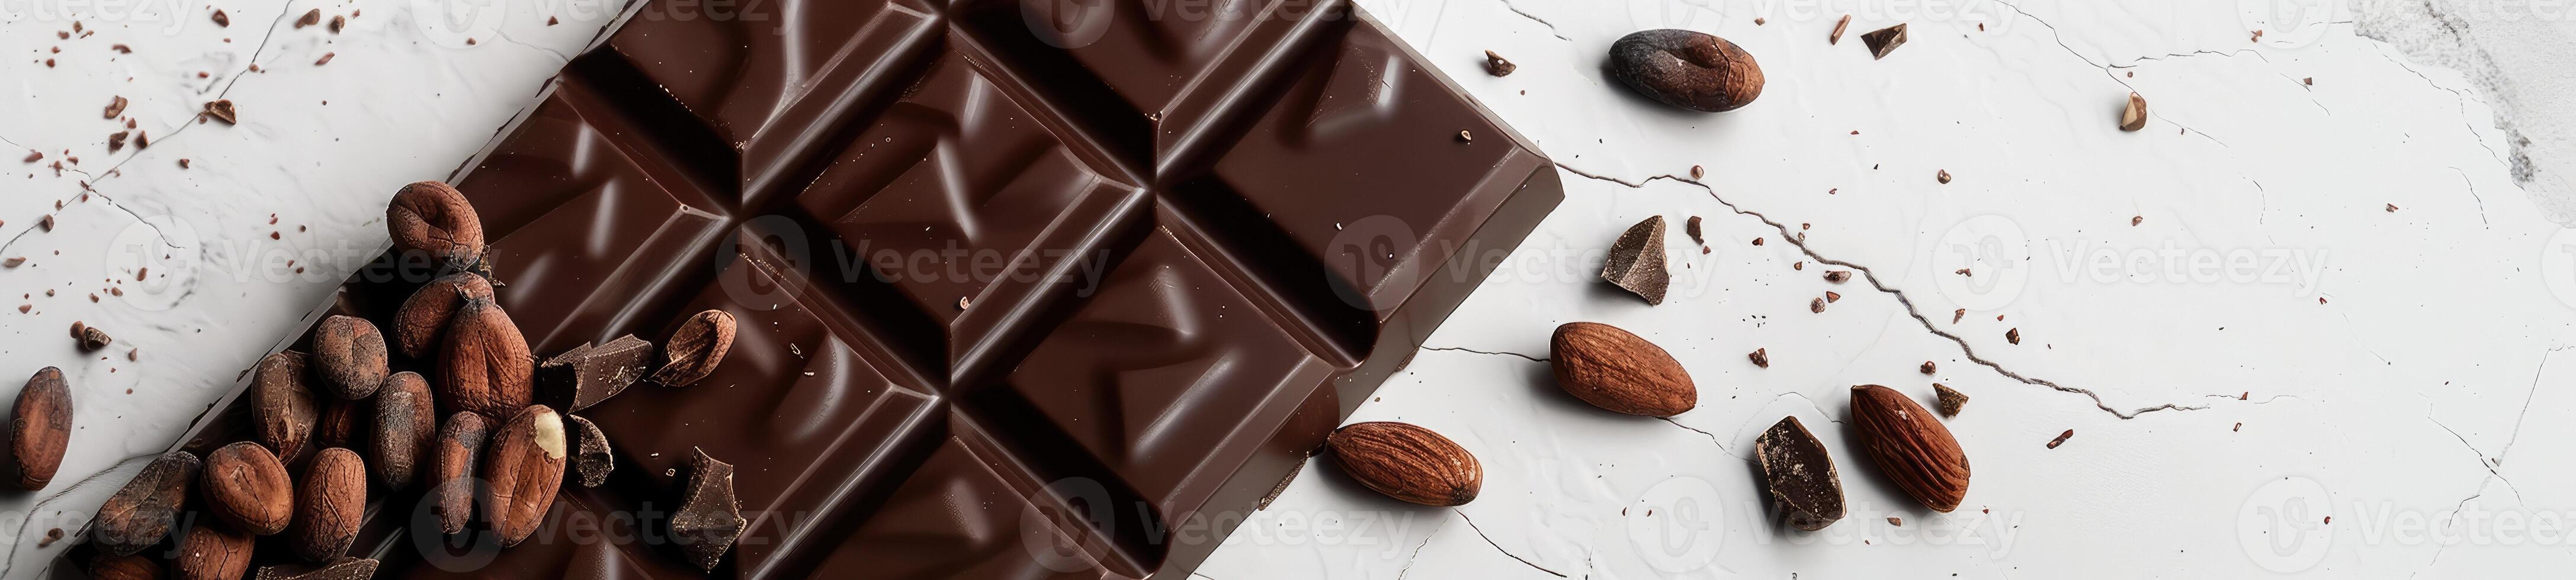 Chocolate bar with cacao beans and almonds scattered around it photo